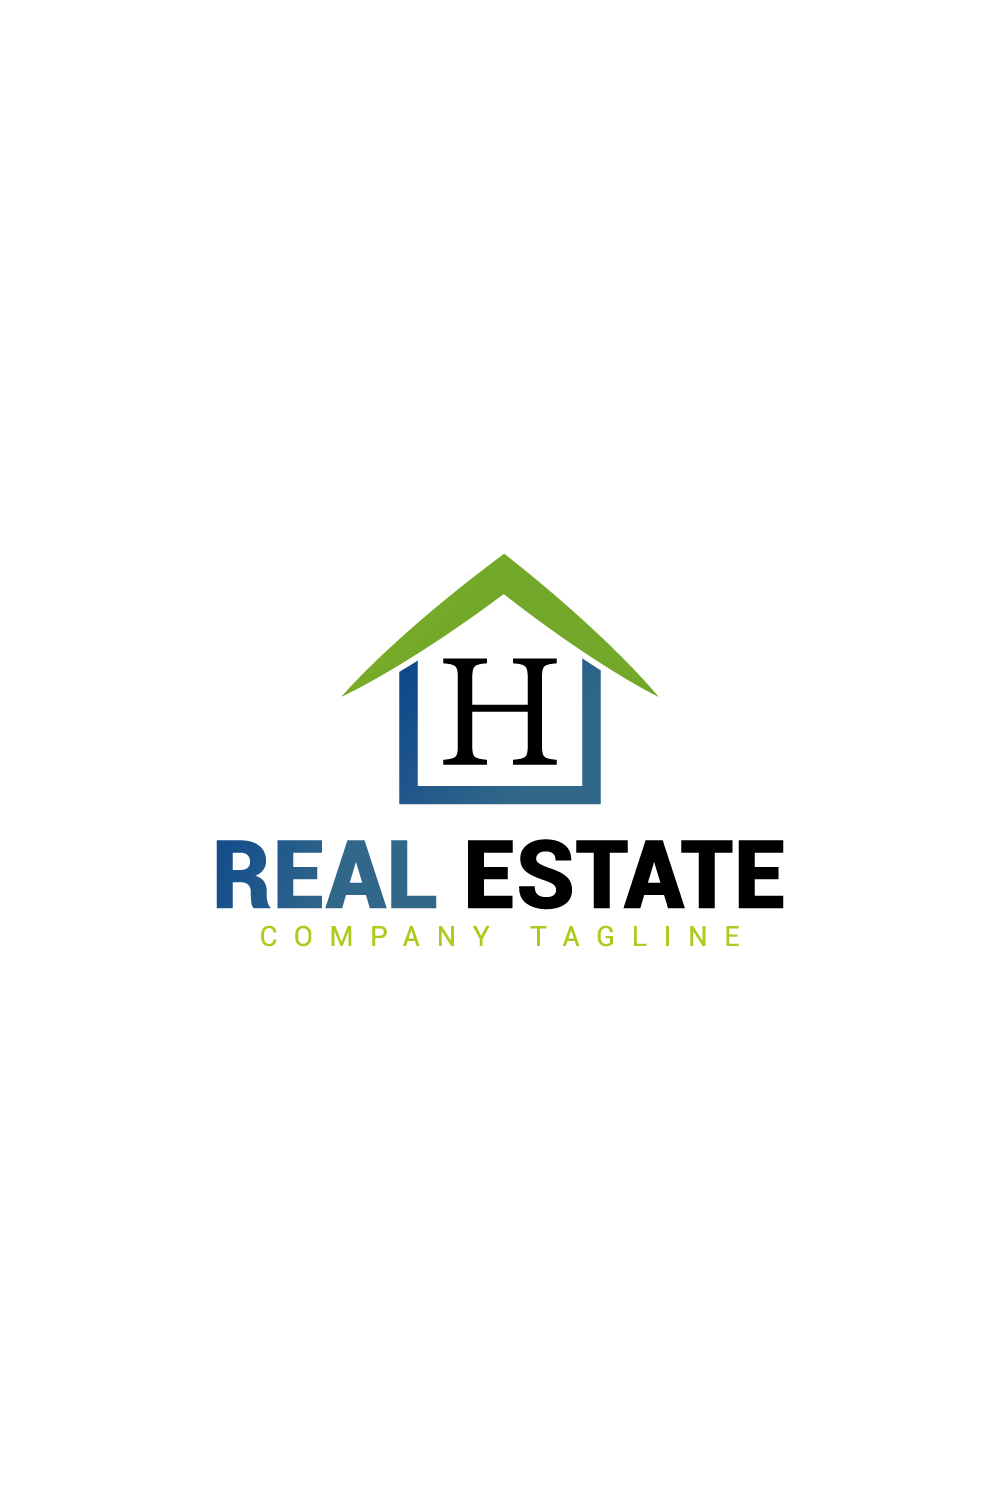 Real estate logo with green, dark blue color and H letter pinterest preview image.